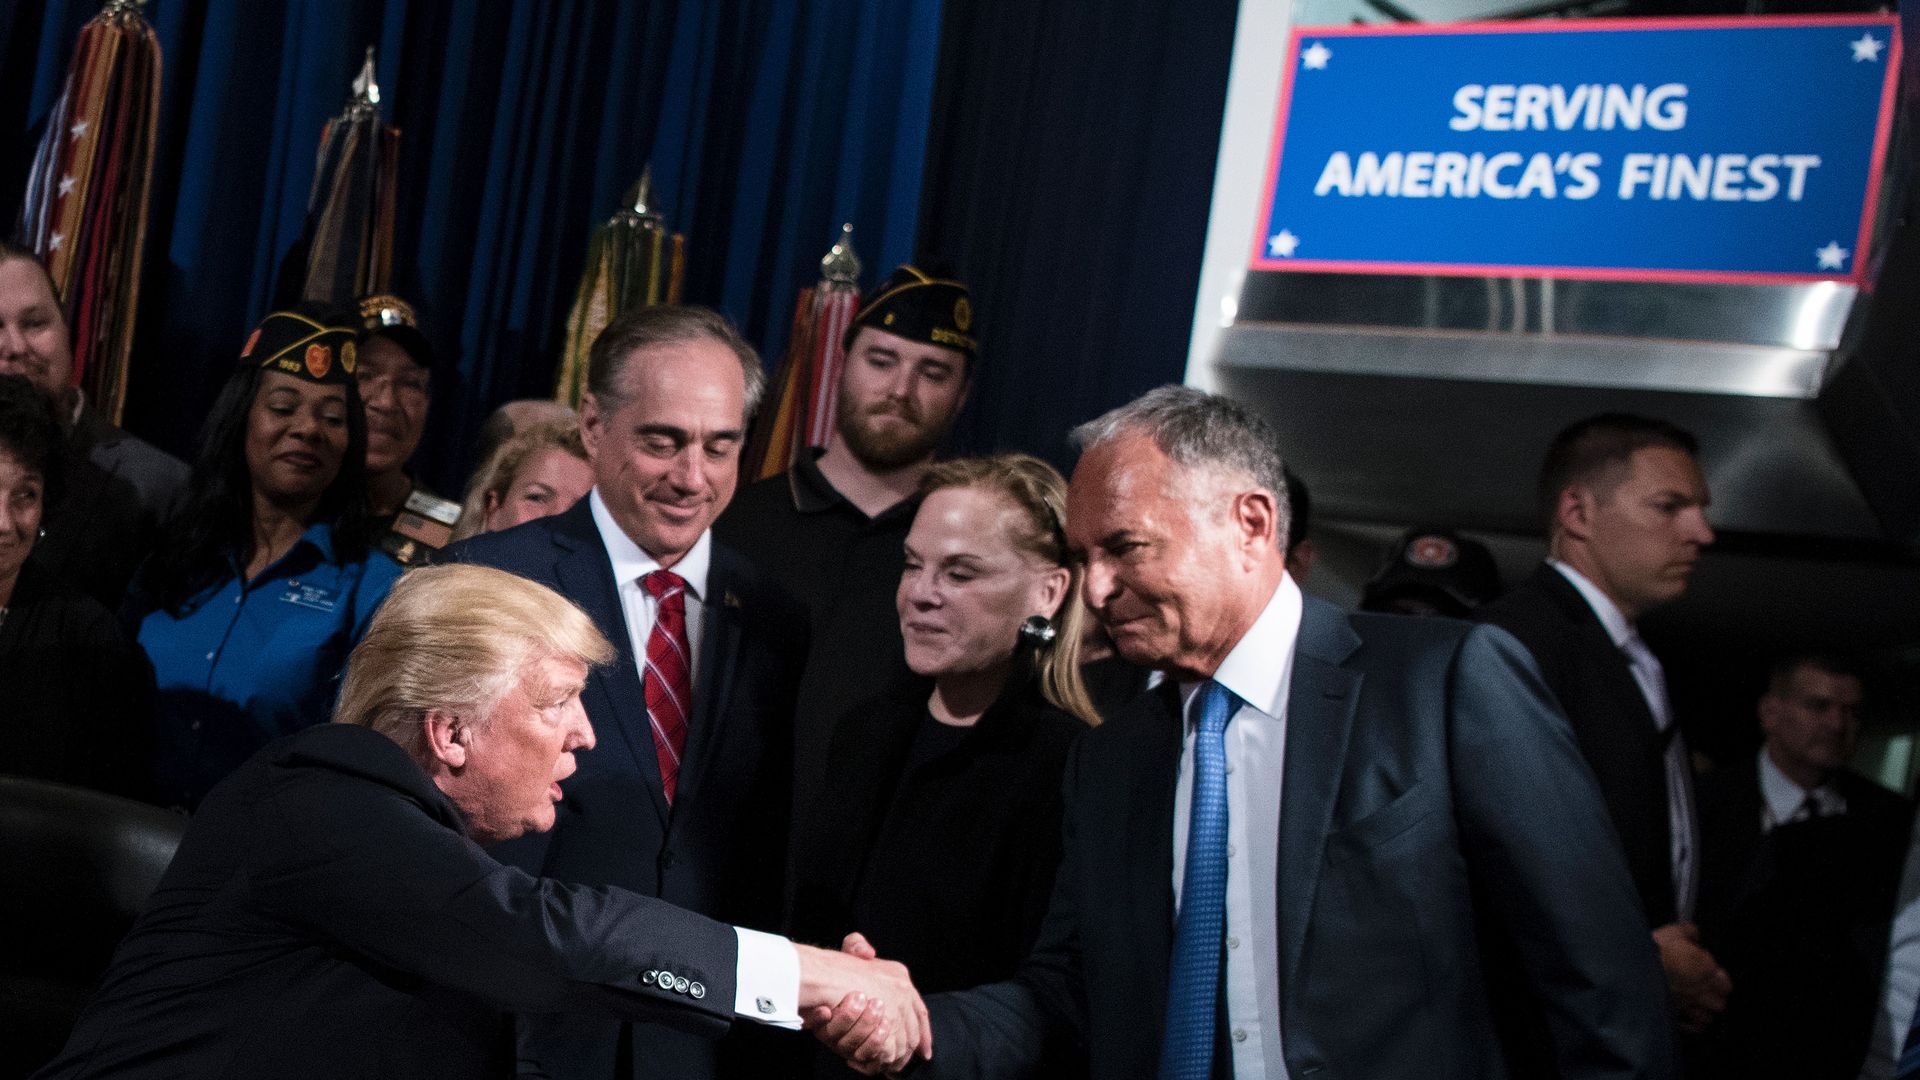 Trump shaking hands with Ike Perlmutter with David Shulkin looking on